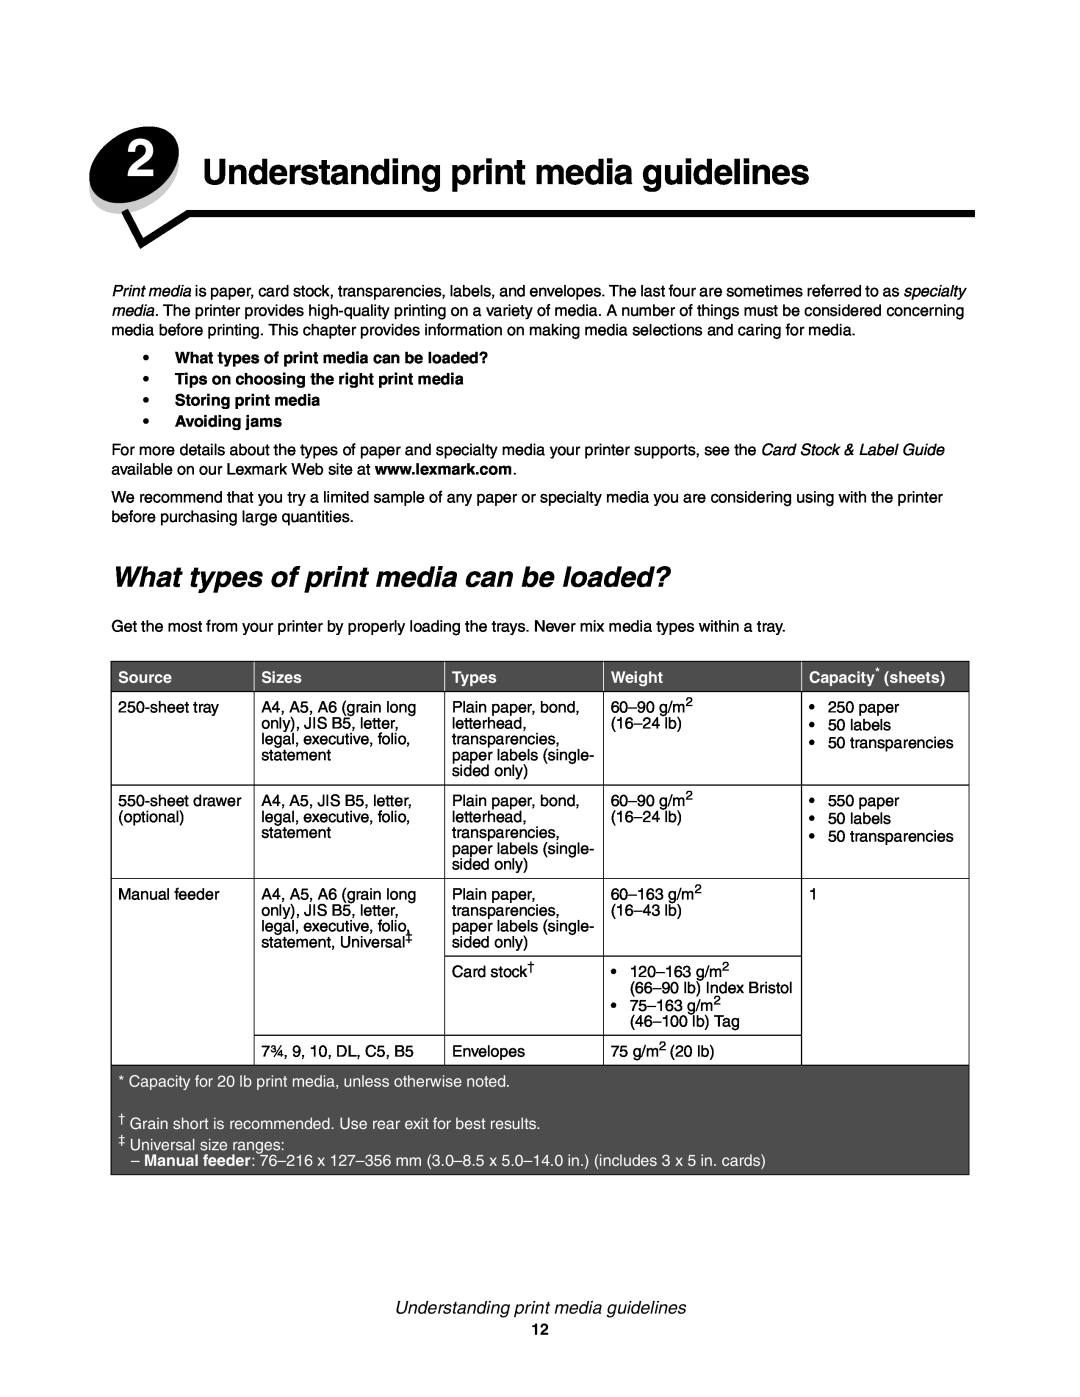 Lexmark 450dn manual Understanding print media guidelines, What types of print media can be loaded?, Avoiding jams 